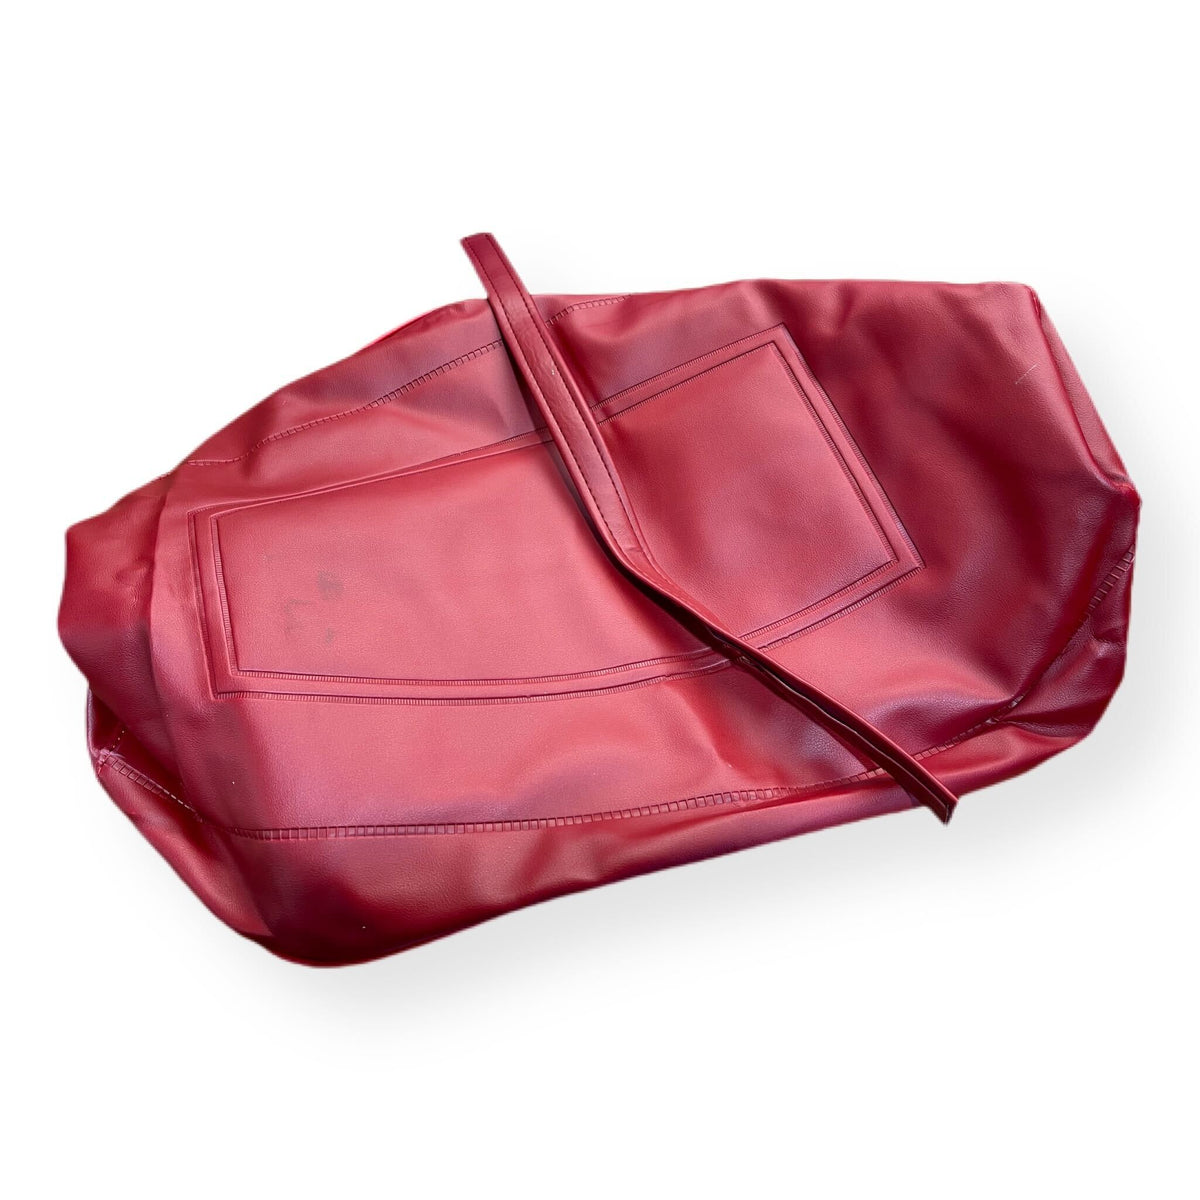 Vespa PX PE T5 Classic Seat Cover - Oxblood Red